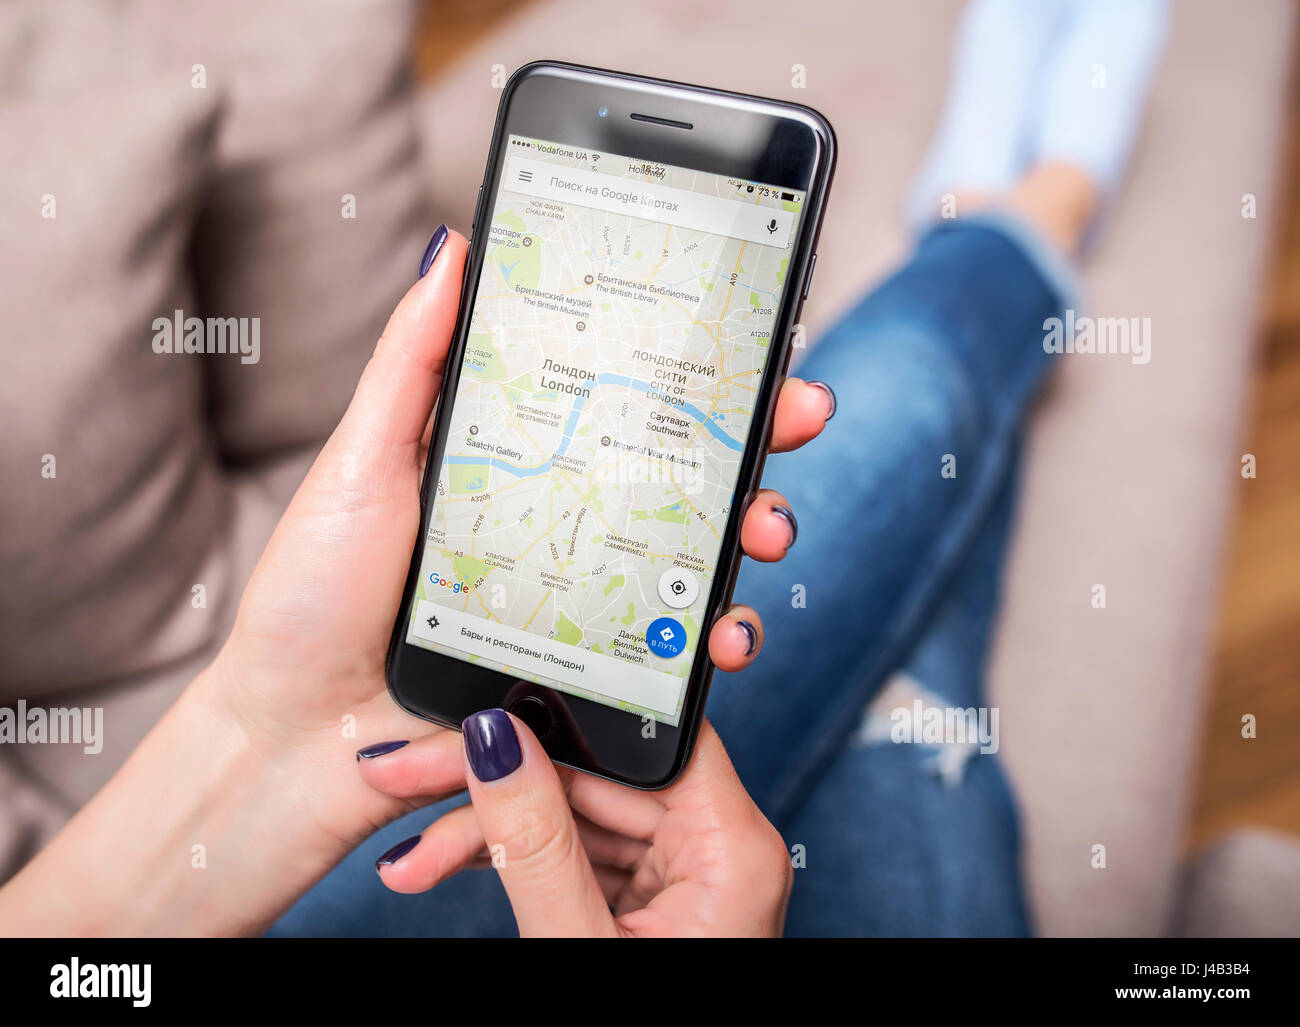 Black iPhone 7 Plus with Google Maps in hands. Stock Photo